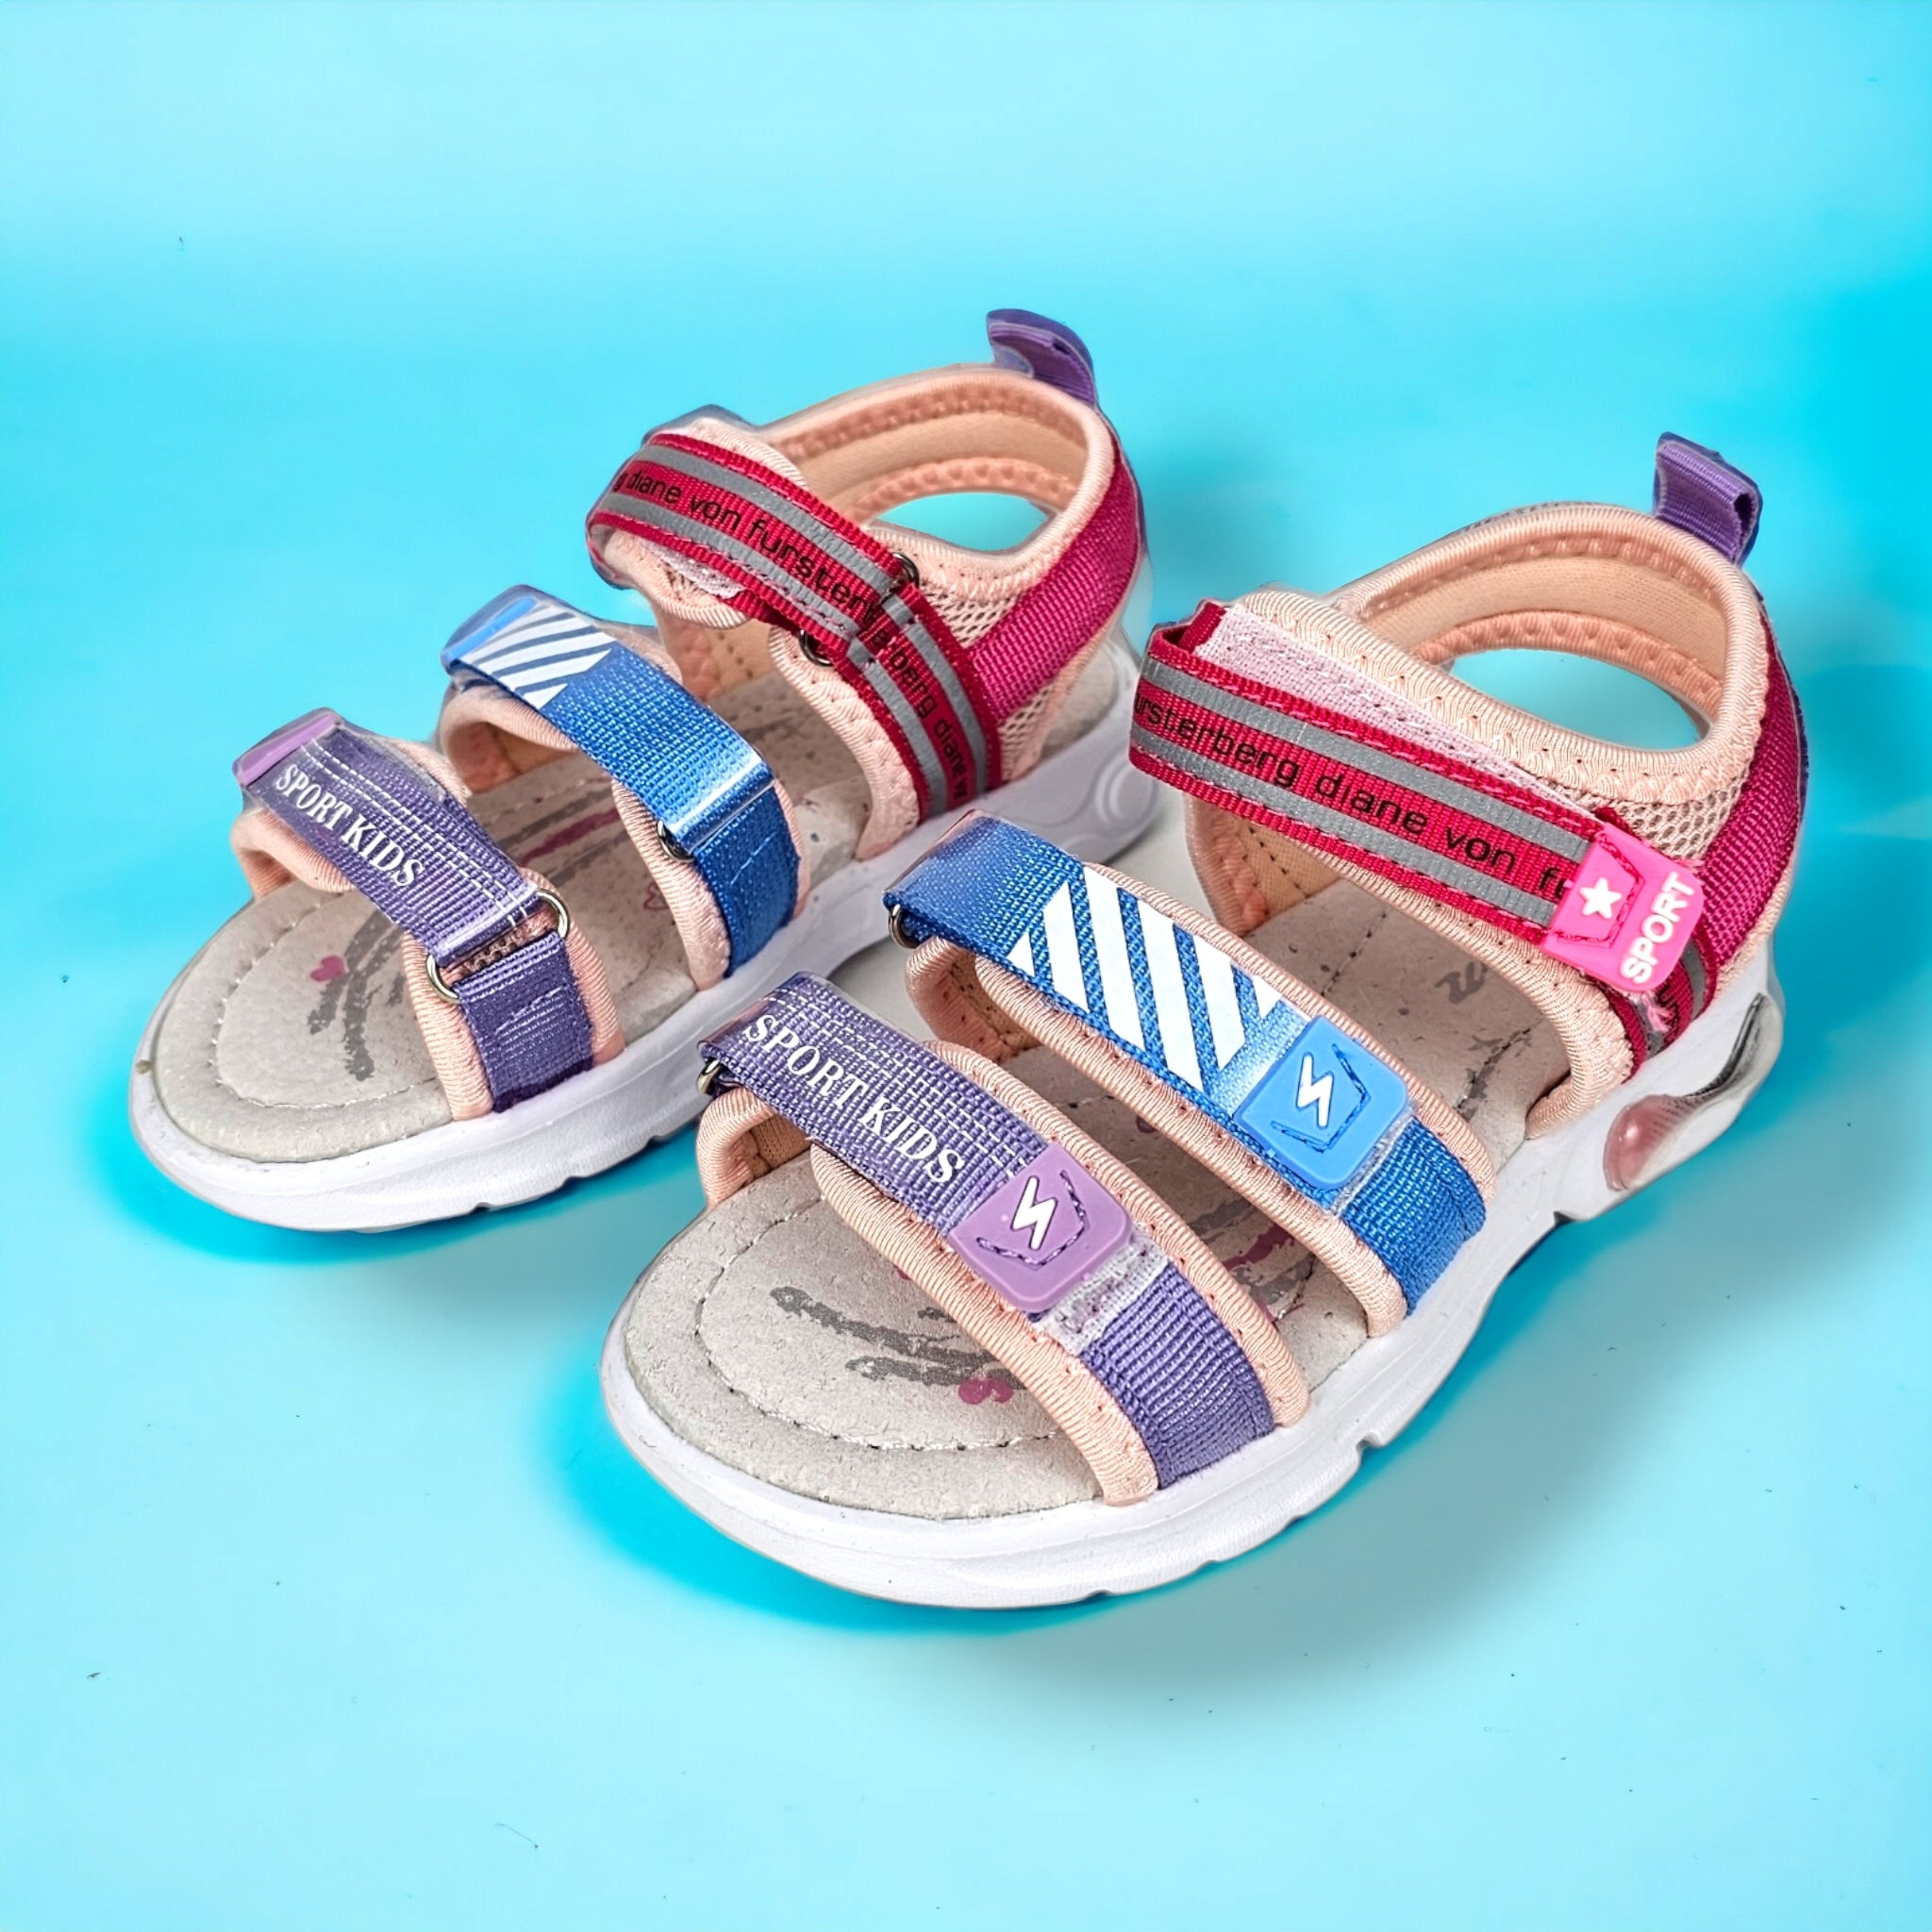 Kids Sandals Marvel  Violet Pink Made of Textile Material and Natural Leather